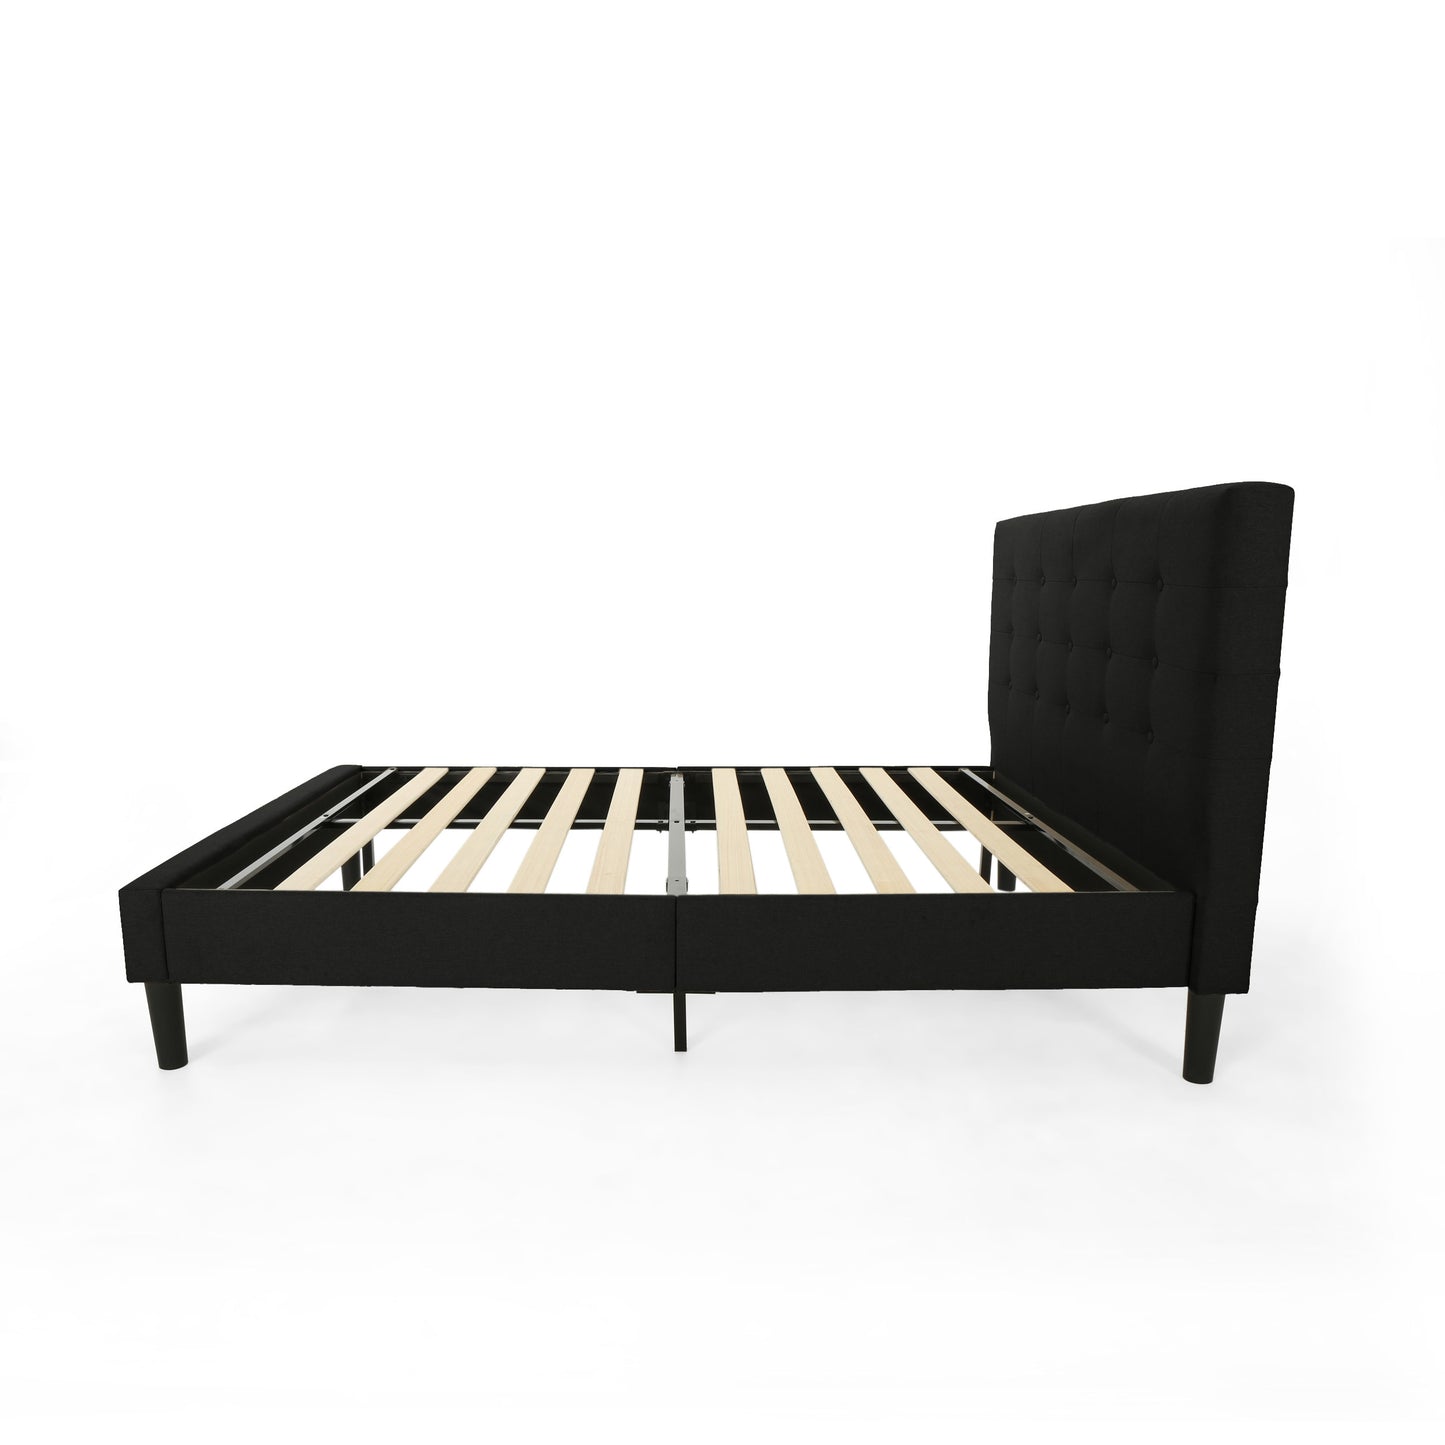 Gloria Fully-Upholstered Queen-Size Platform Bed Frame, Modern, Contemporary, Low-Profile